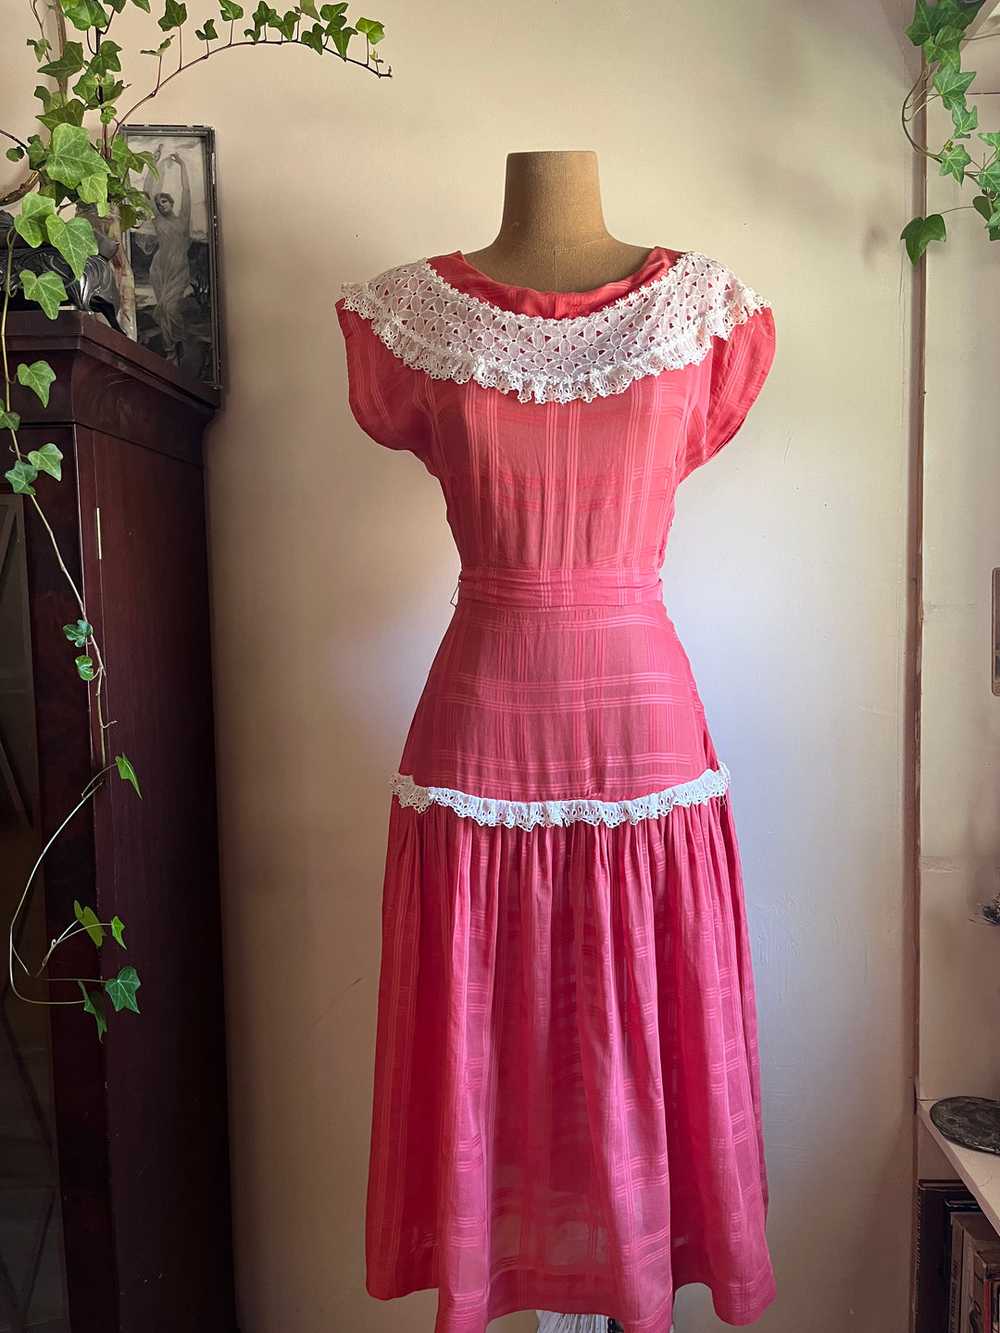 1950’s Vintage Sheer Cotton and Lace dress by Vic… - image 1